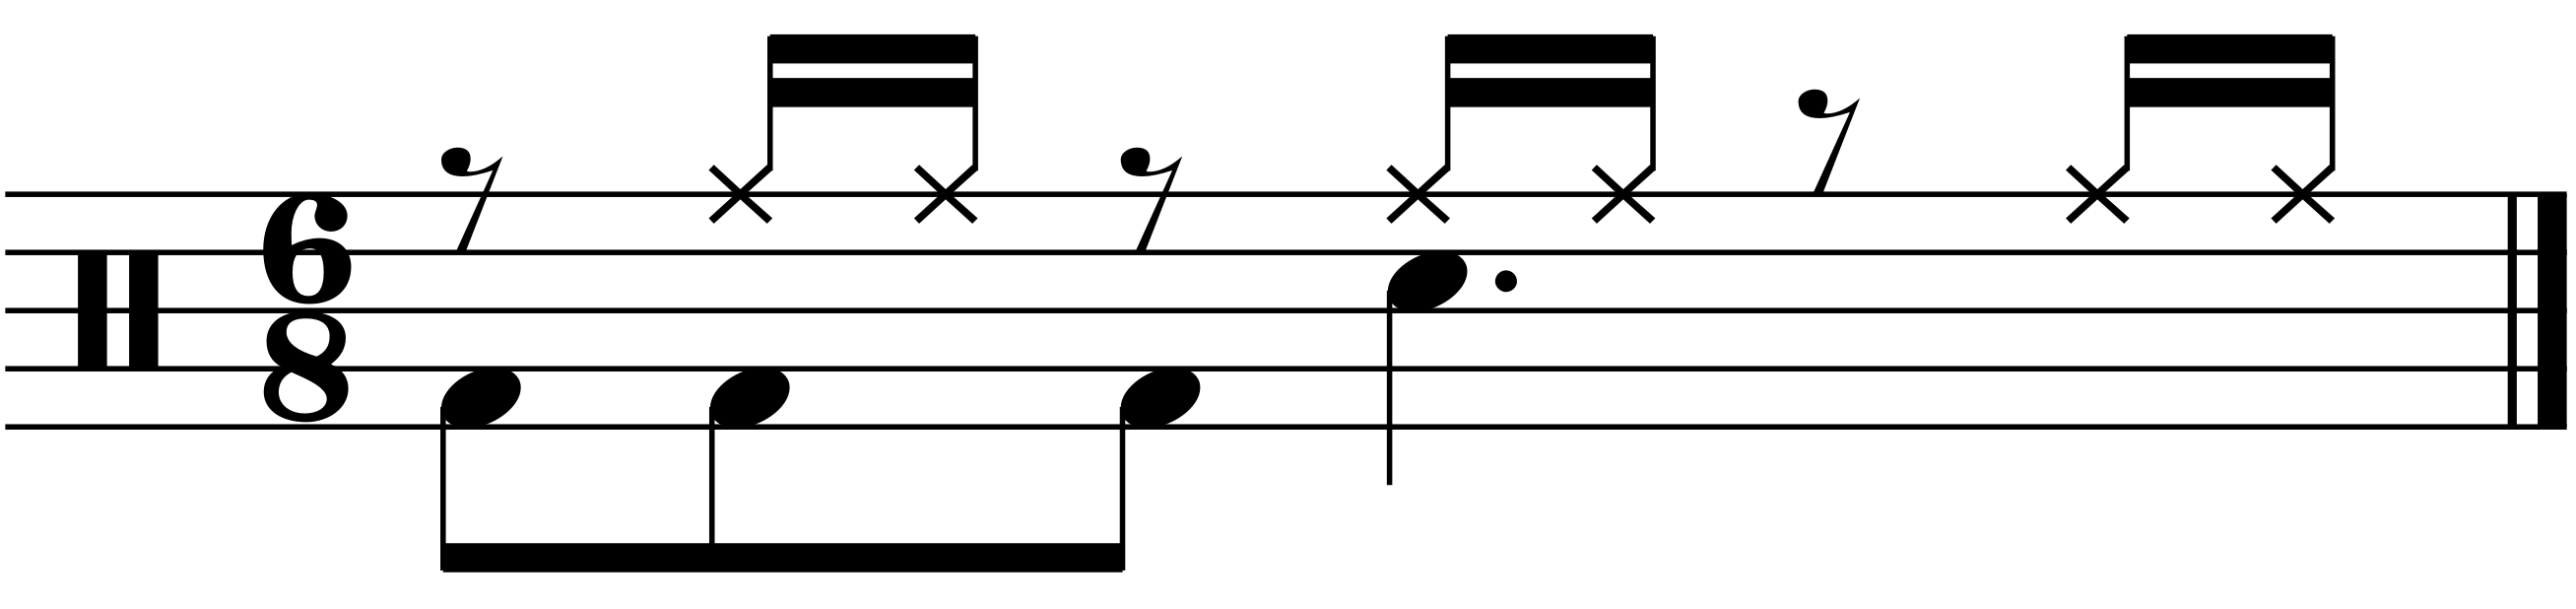 An unusual rhythm for the right hand in 6/8